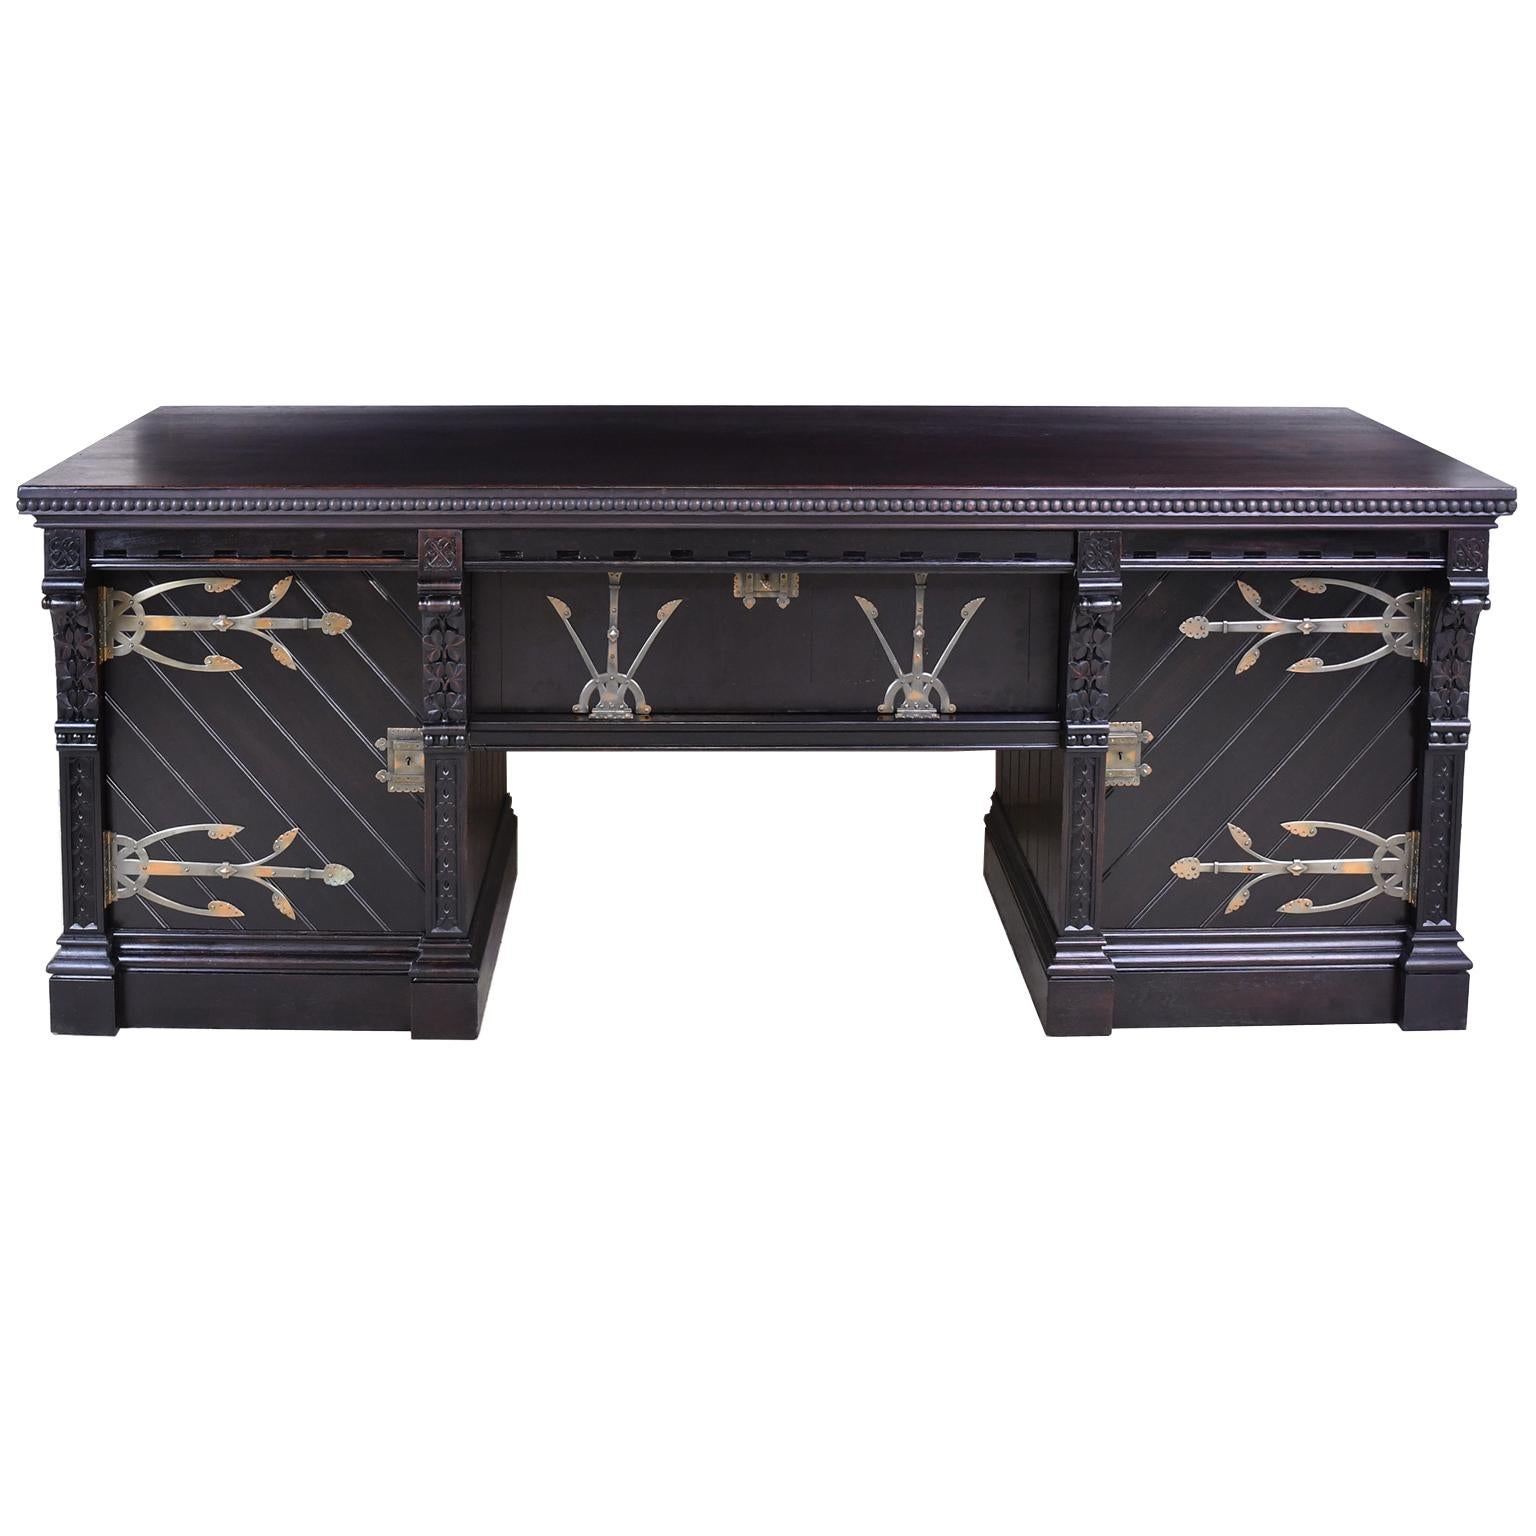 A Philadelphia Arts & Crafts / Aesthetic Movement sideboard in walnut with a facsimile of the original black ebonized finish, attributed to Frank Furness (1839-1912) and likely crafted by Daniel Pabst, Philadelphia, circa 1900. Furness was a leading